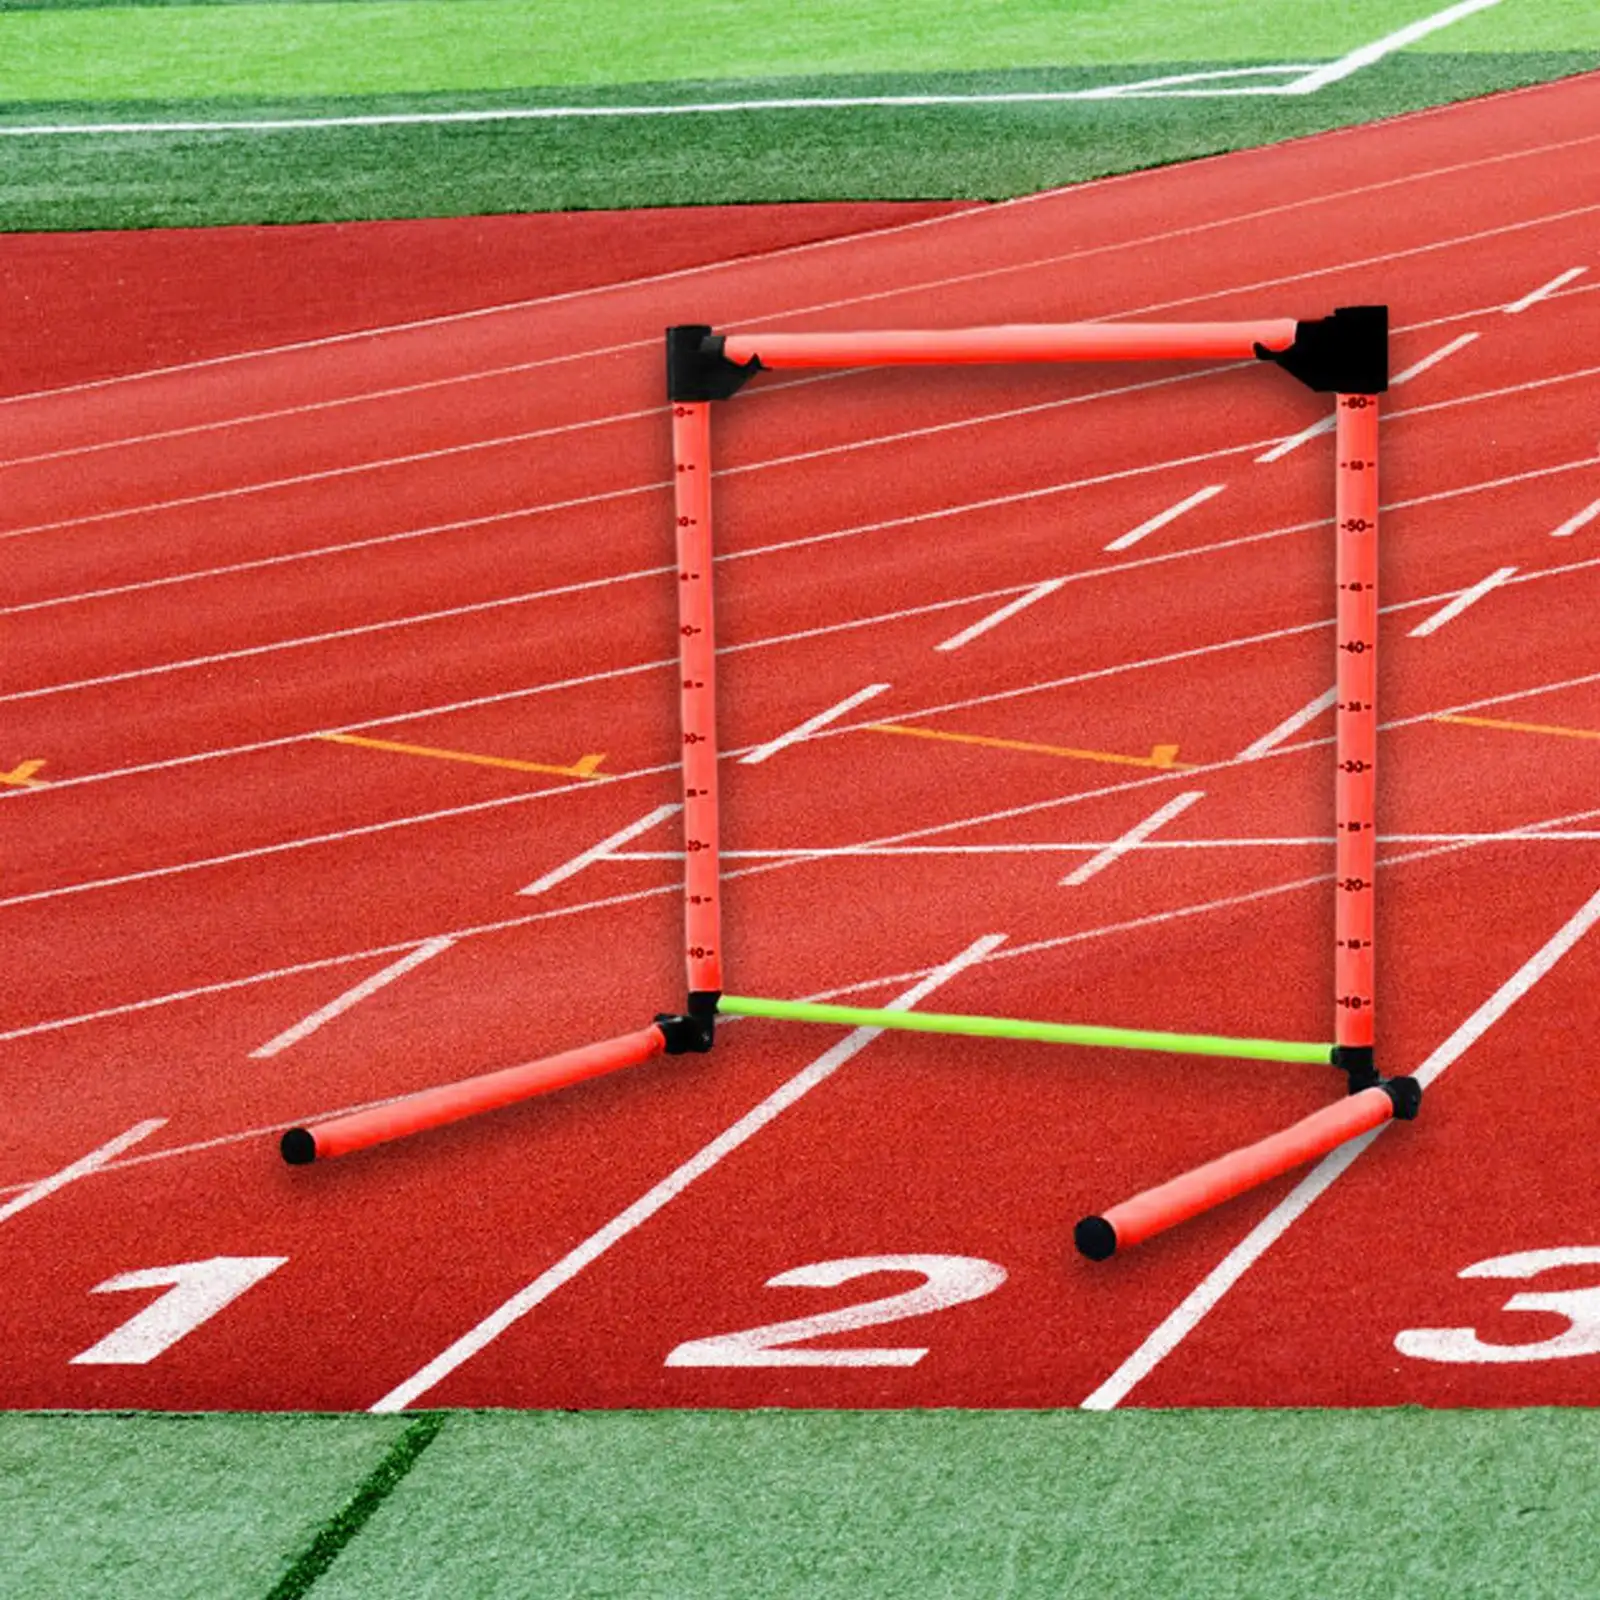 Agility Training Hurdles Adjustable Scale Agility Speed Training Equipment for Soccer Hurdle Training Athletes Workout Jumping